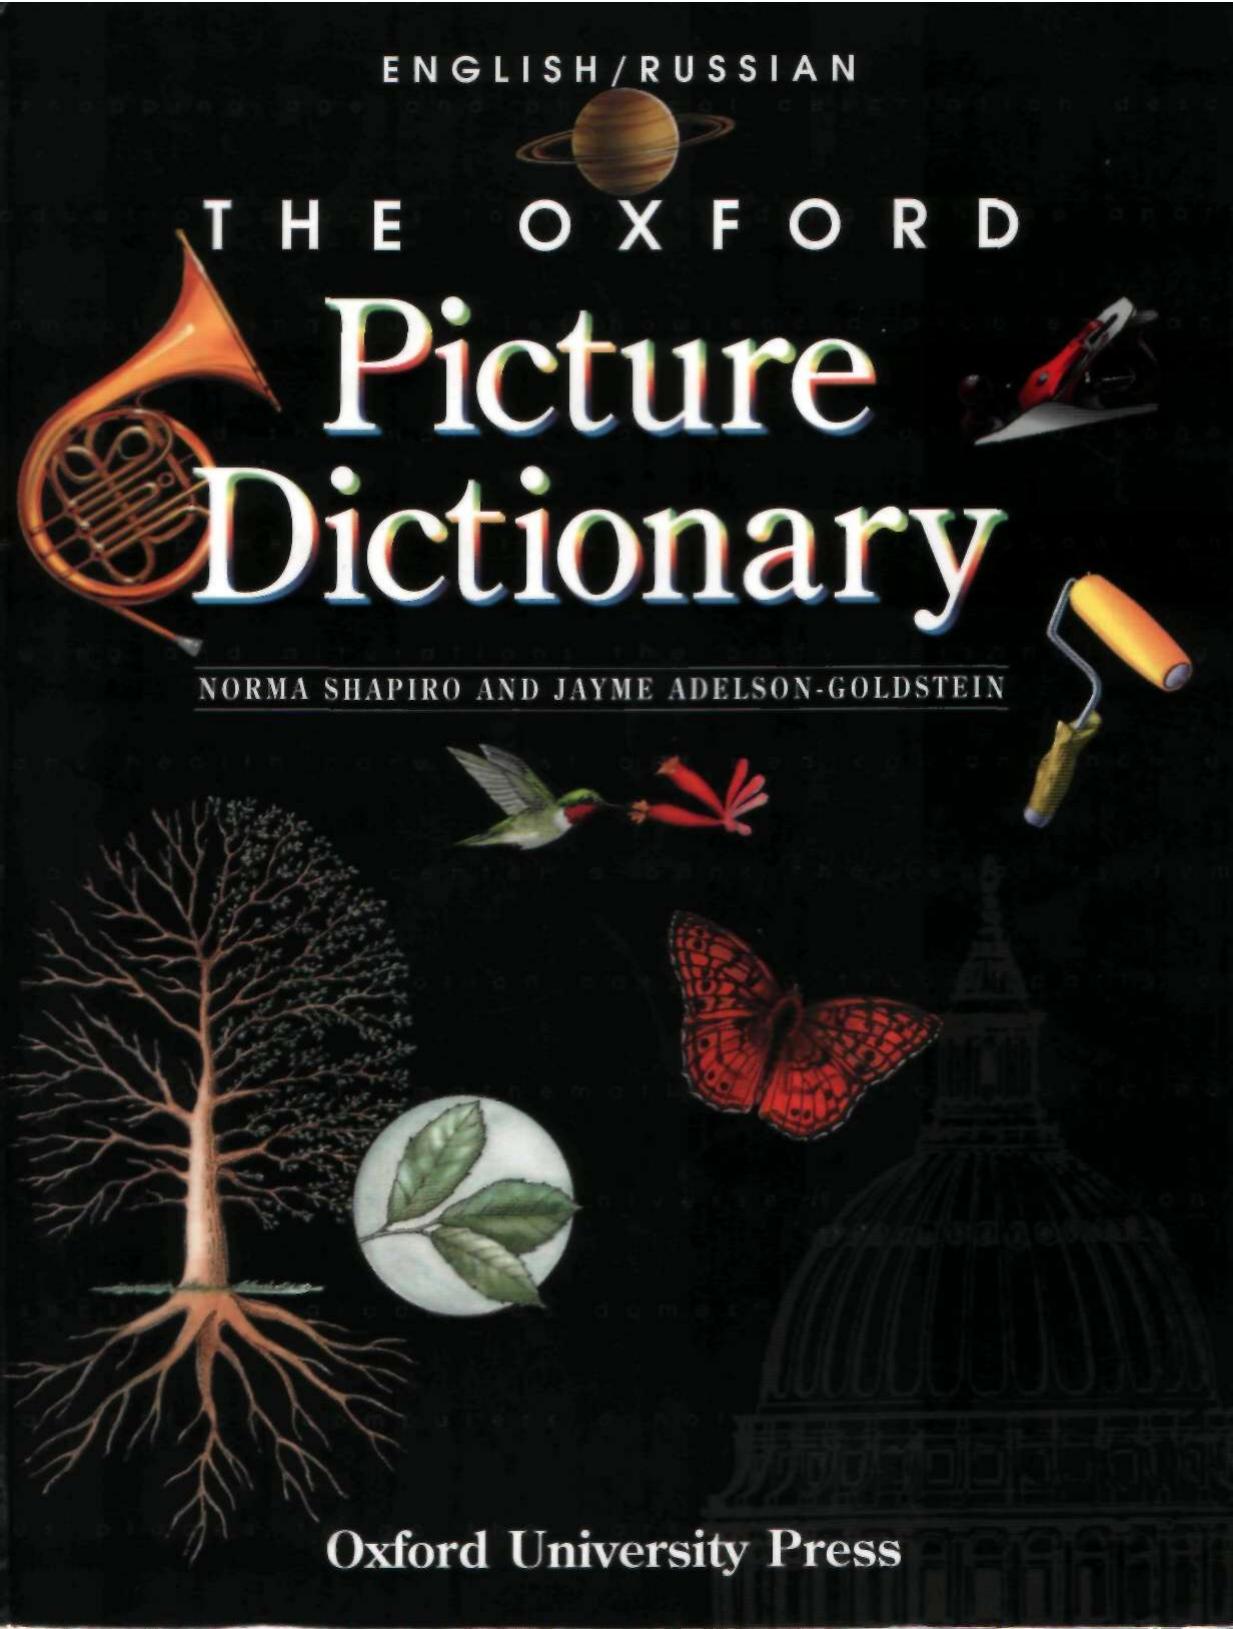 The Oxford Picture Dictionary: English-Russian